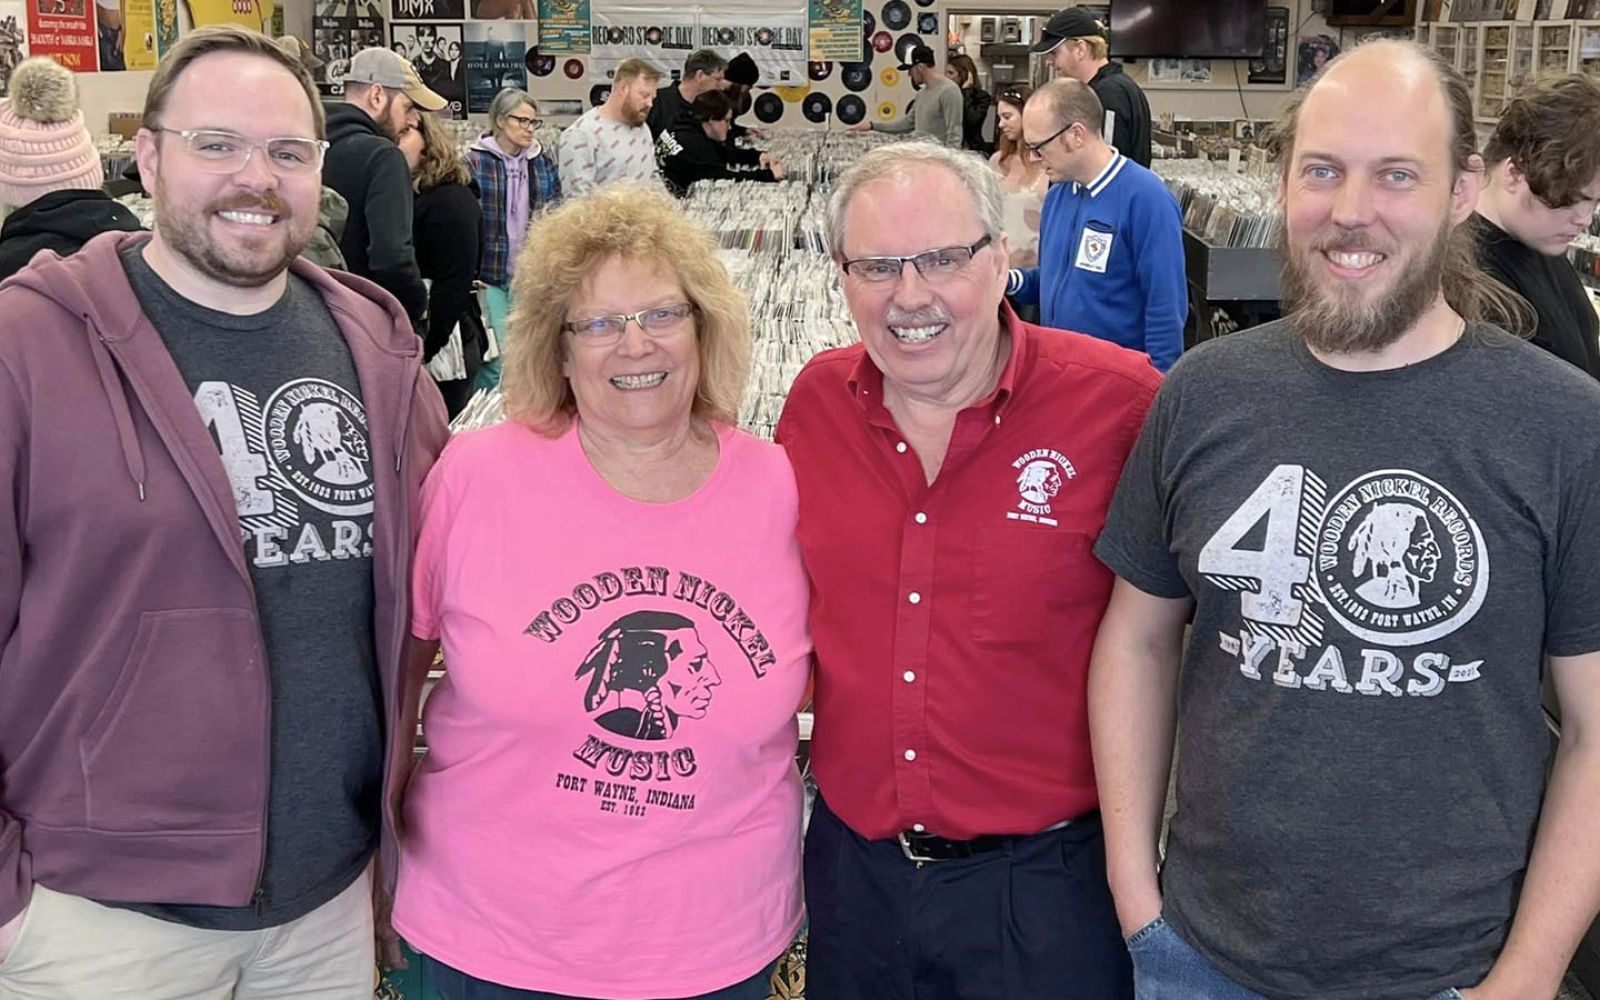 Following his retirement, former Wooden Nickel Records owner Bob Roets will have more time to spend with his family, from left, son Andy Roets, wife Cindy Roets, and son and new Wooden Nickel Records owner Christopher Roets.